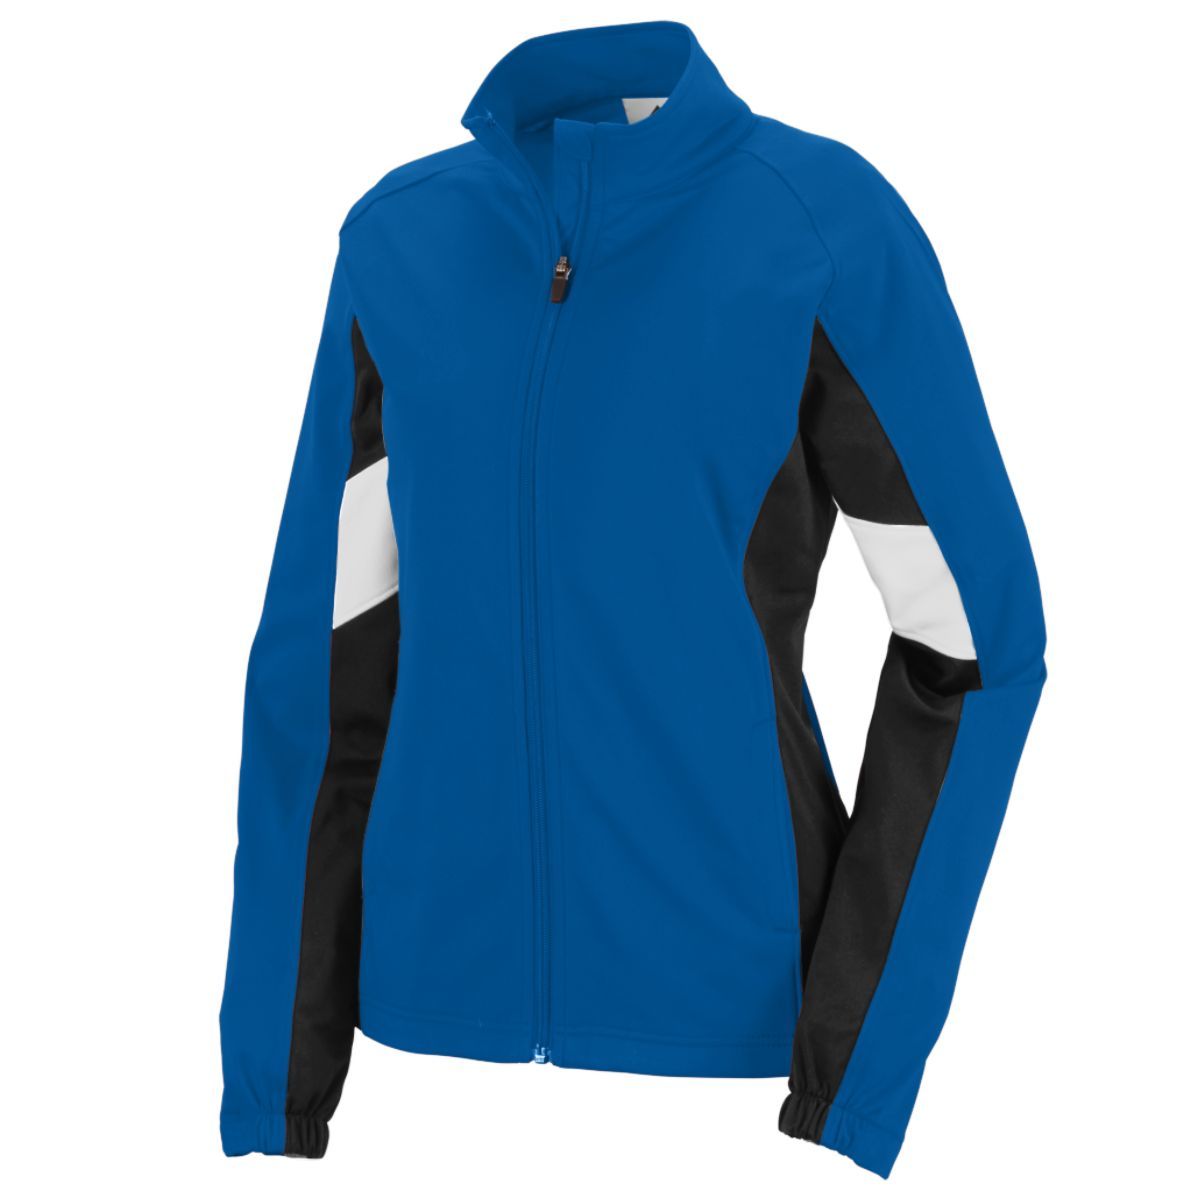 Augusta Sportswear Ladies Tour De Force Jacket in Royal/Black/White  -Part of the Ladies, Ladies-Jacket, Augusta-Products, Outerwear product lines at KanaleyCreations.com